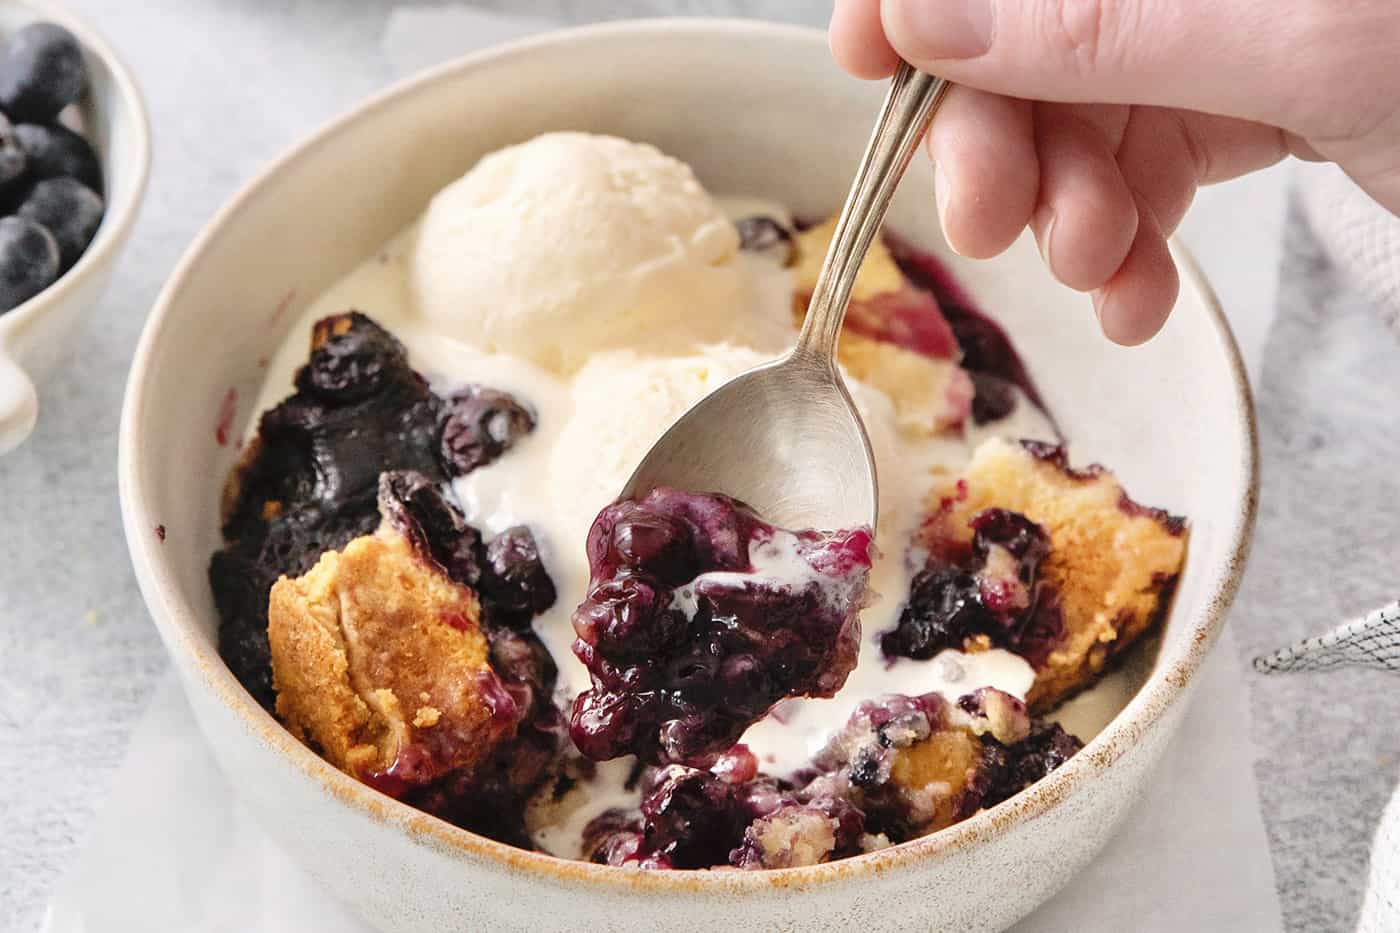 A hand holds a spoon dipping into a bowl of blueberry dump cake.